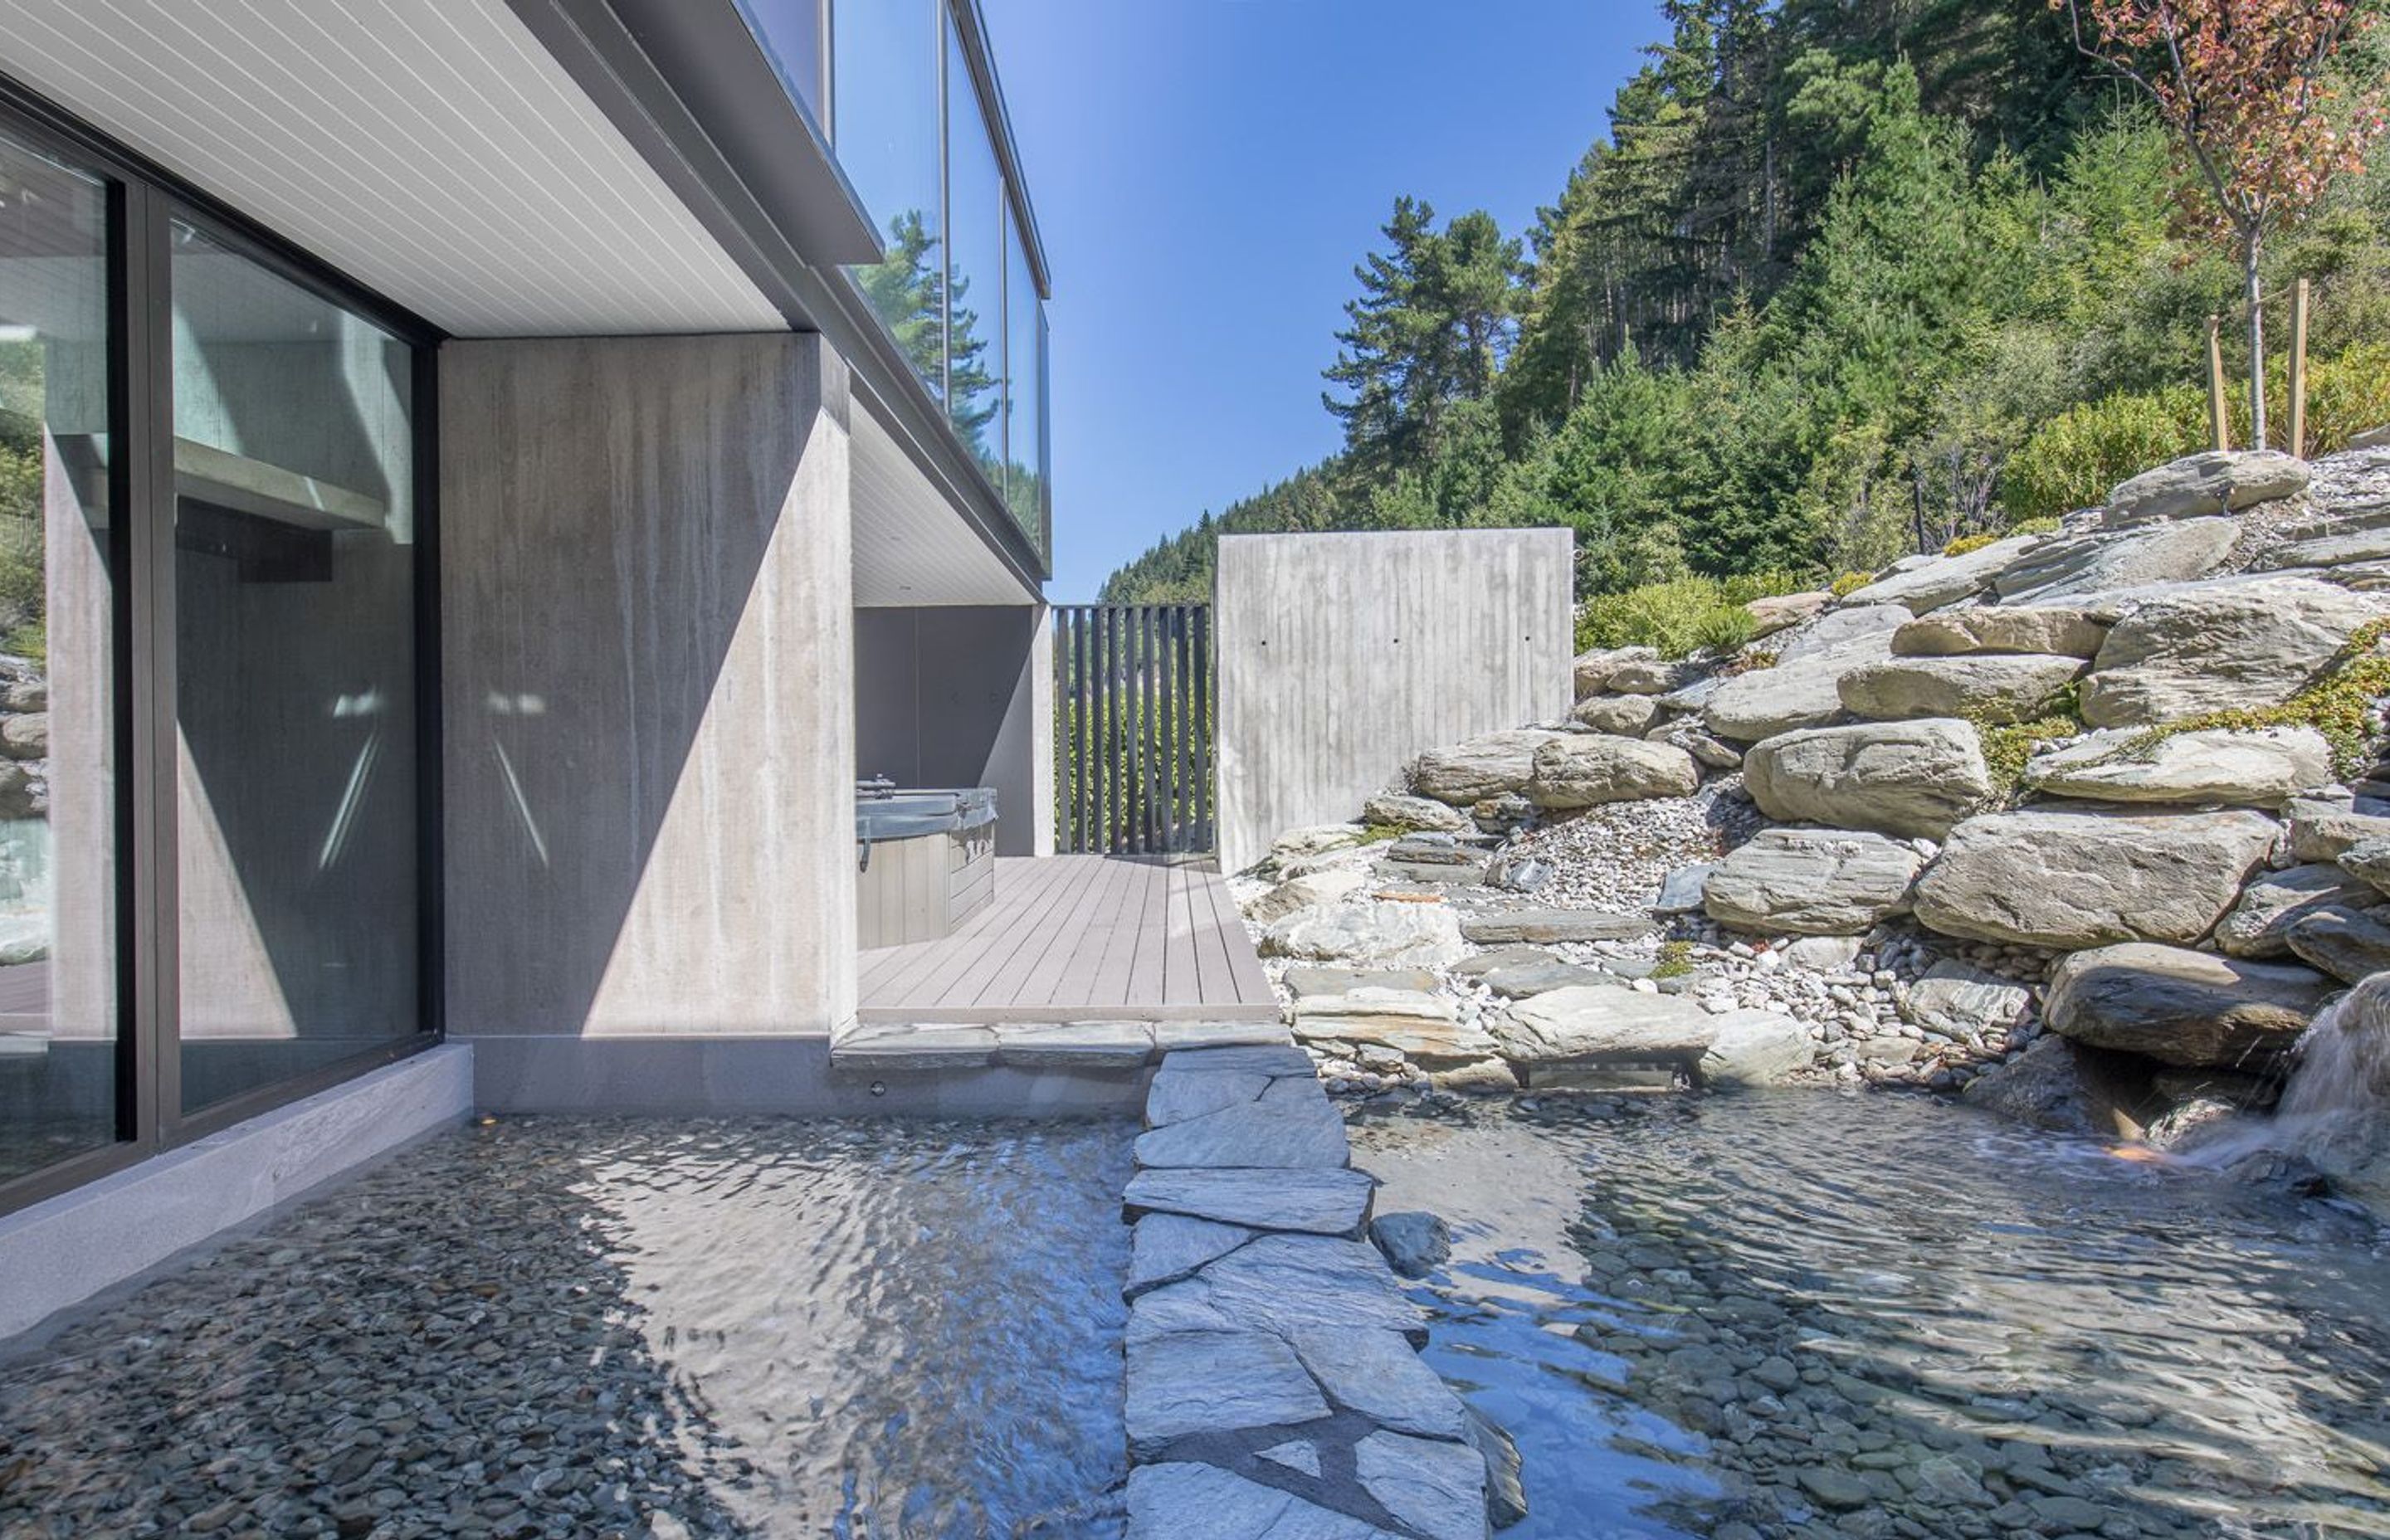 The waterfall trickles in a reflection pond which has a stone path across the middle, which leads to the spa pool and sauna accessed from the hallway to the family bedrooms.